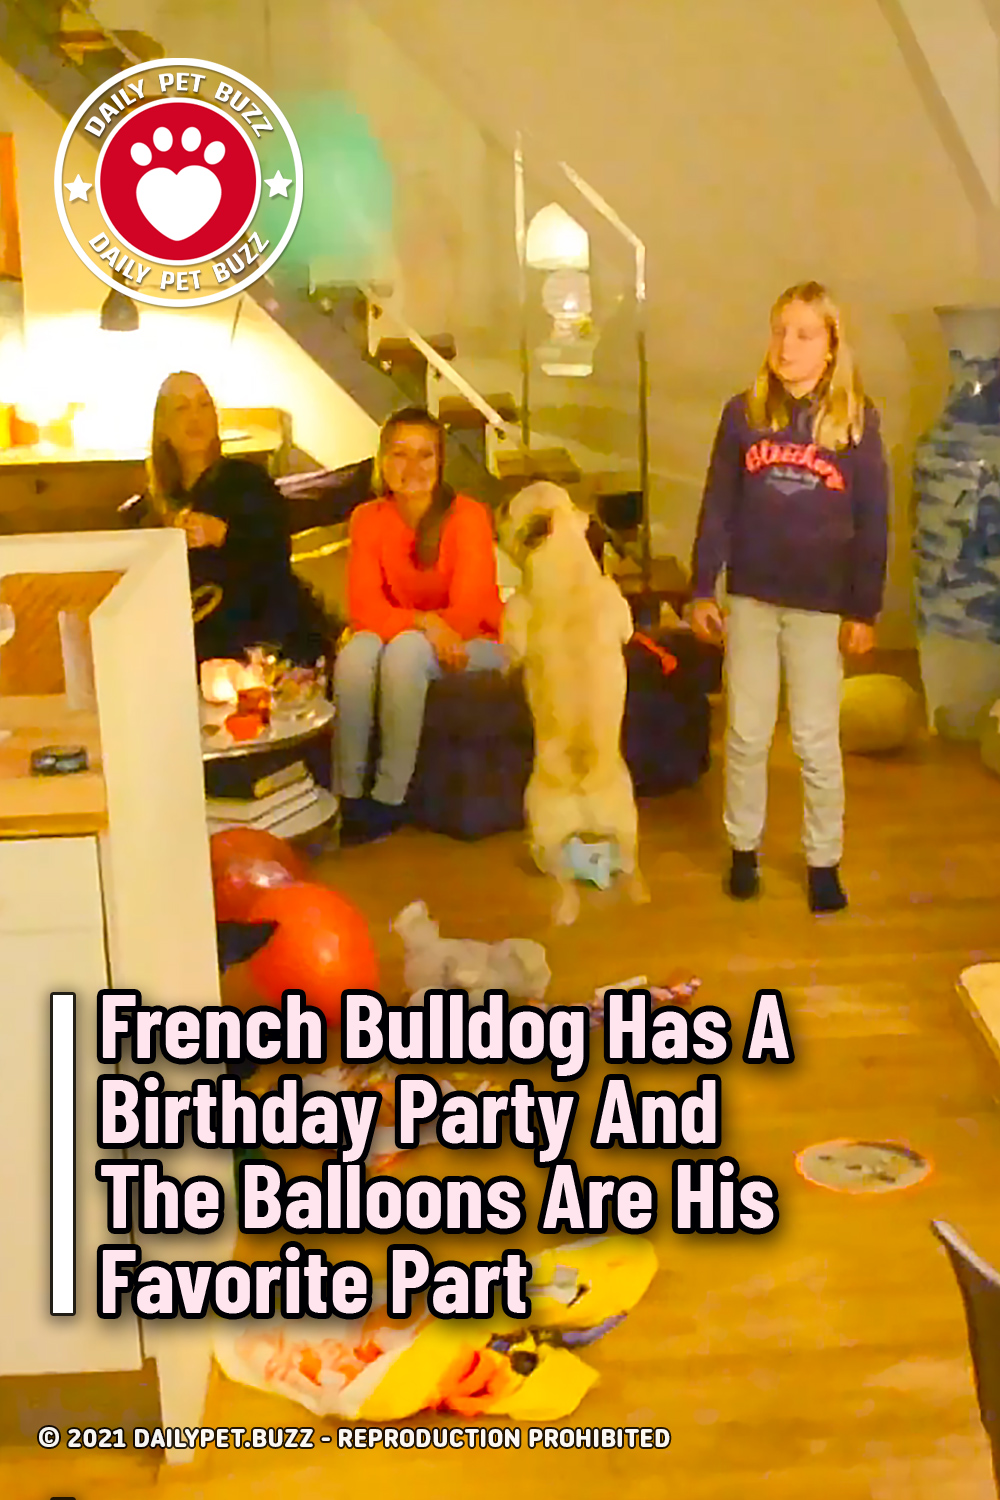 French Bulldog Has A Birthday Party And The Balloons Are His Favorite Part